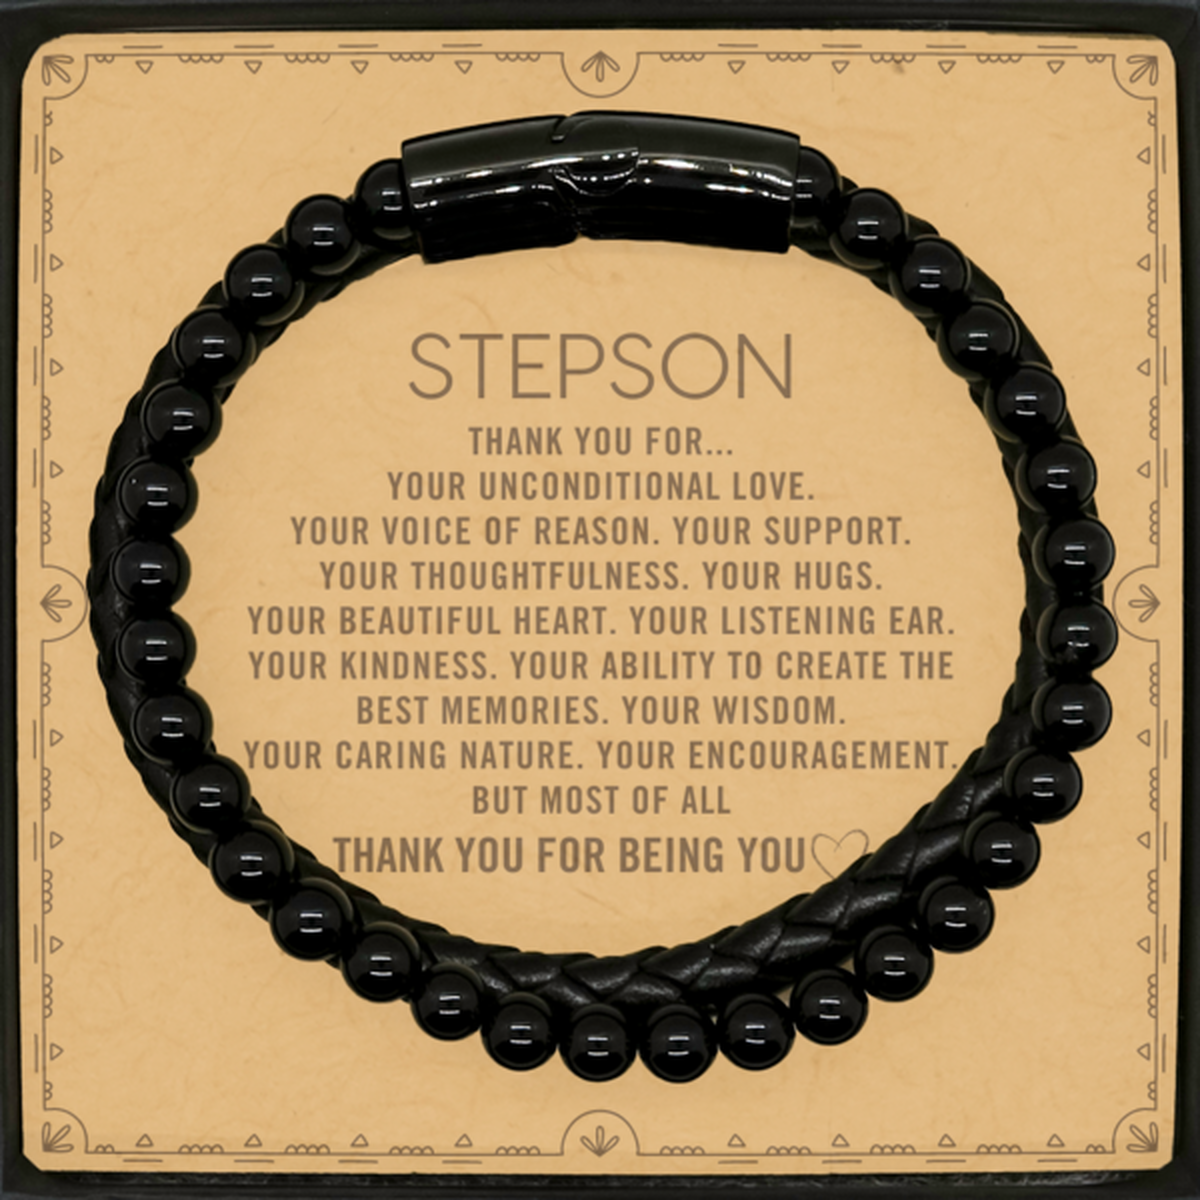 Stepson Stone Leather Bracelets Custom, Message Card Gifts For Stepson Christmas Graduation Birthday Gifts for Men Women Stepson Thank you for Your unconditional love